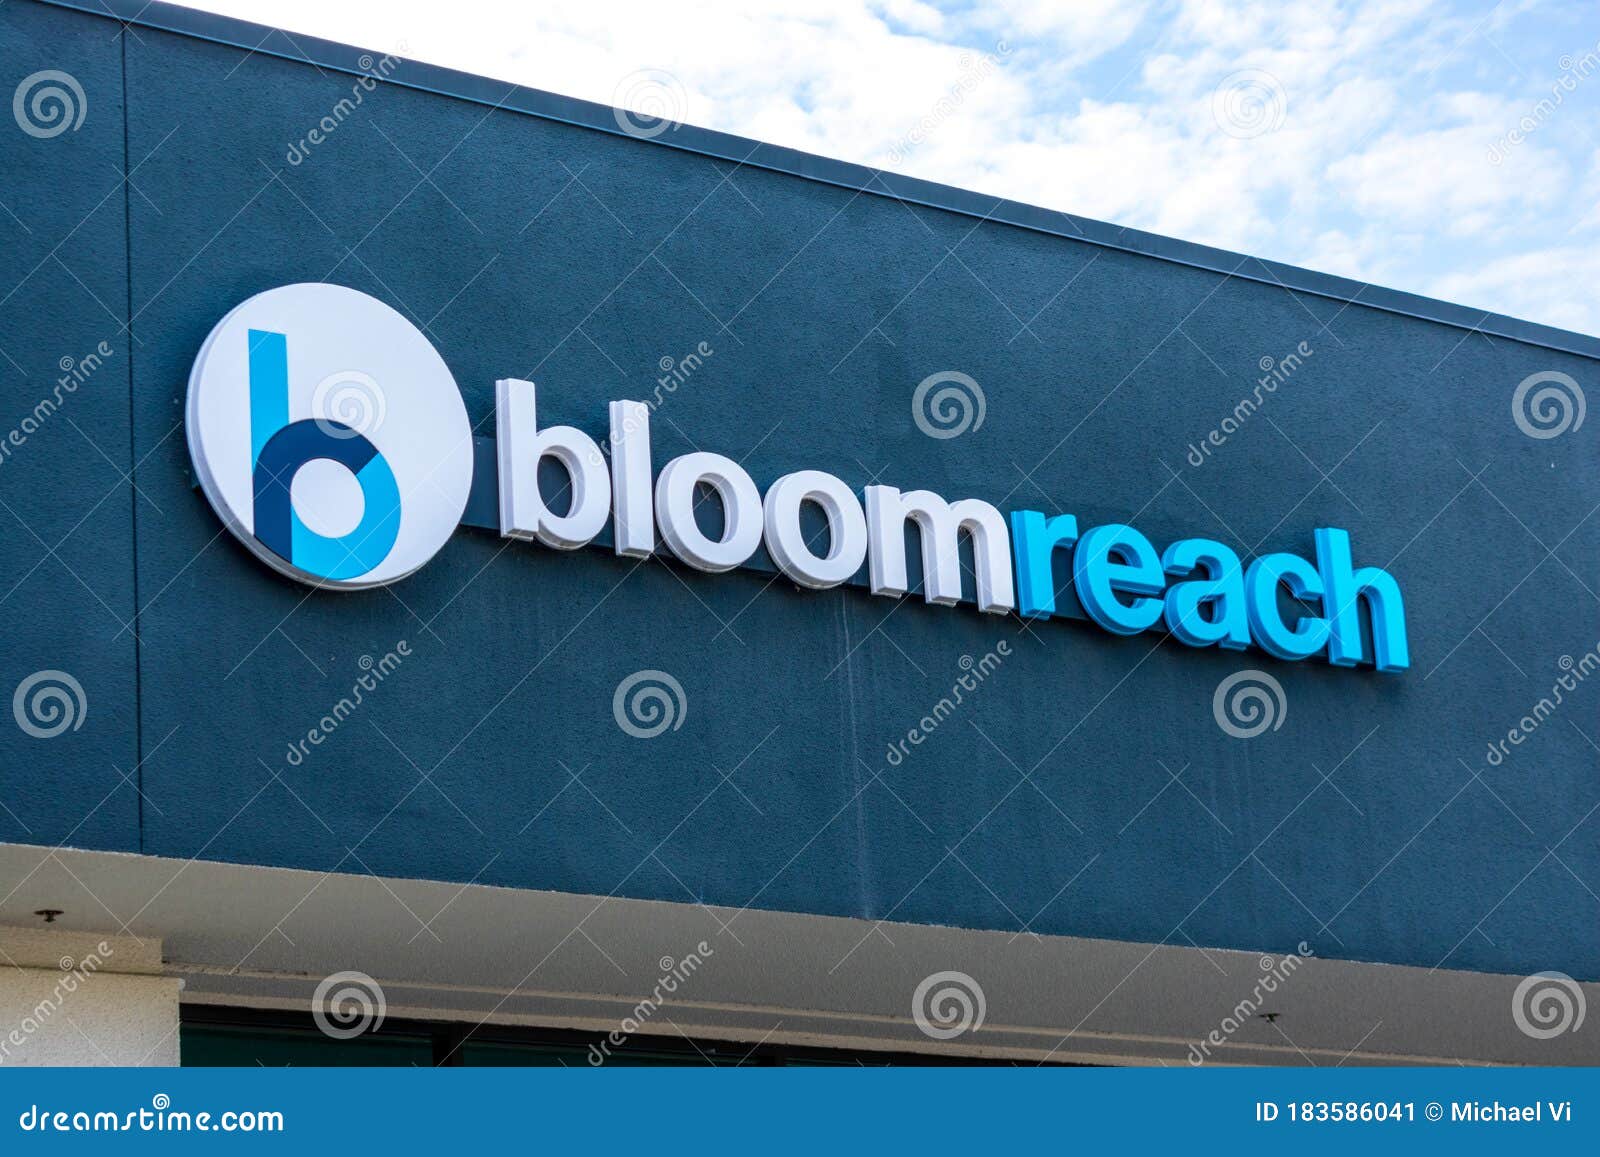 bloomreach photos - free &amp; royalty-free stock photos from dreamstime